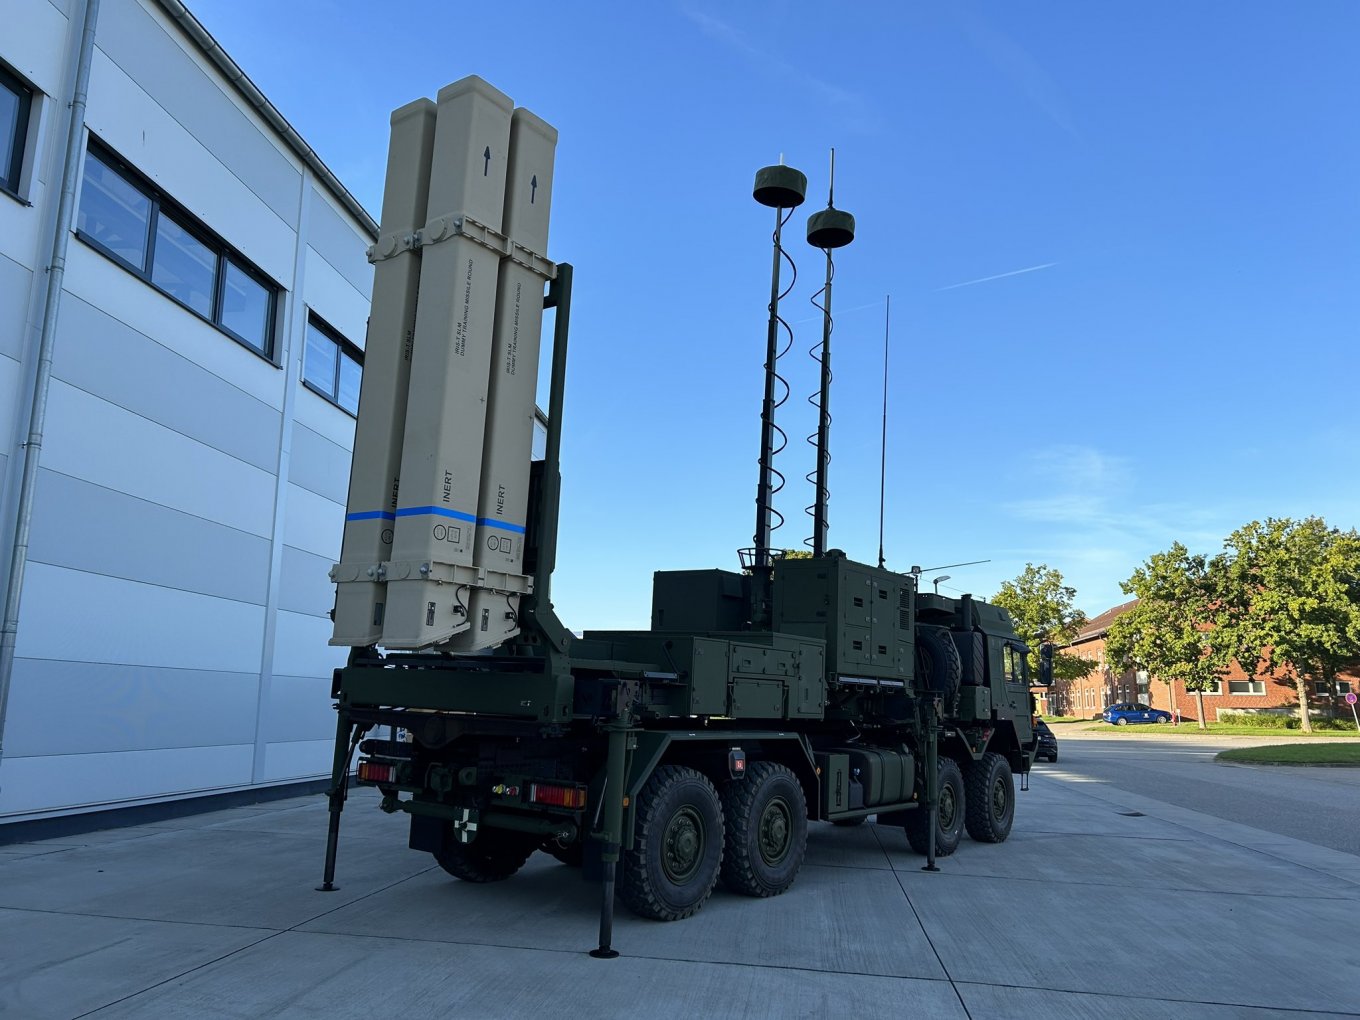 IRIS-T SLM launcher / Defense Express / Substantial Aid Delivered to Ukraine, With Tanks, IFVs, HIMARS and IRIS-T Systems from Germany